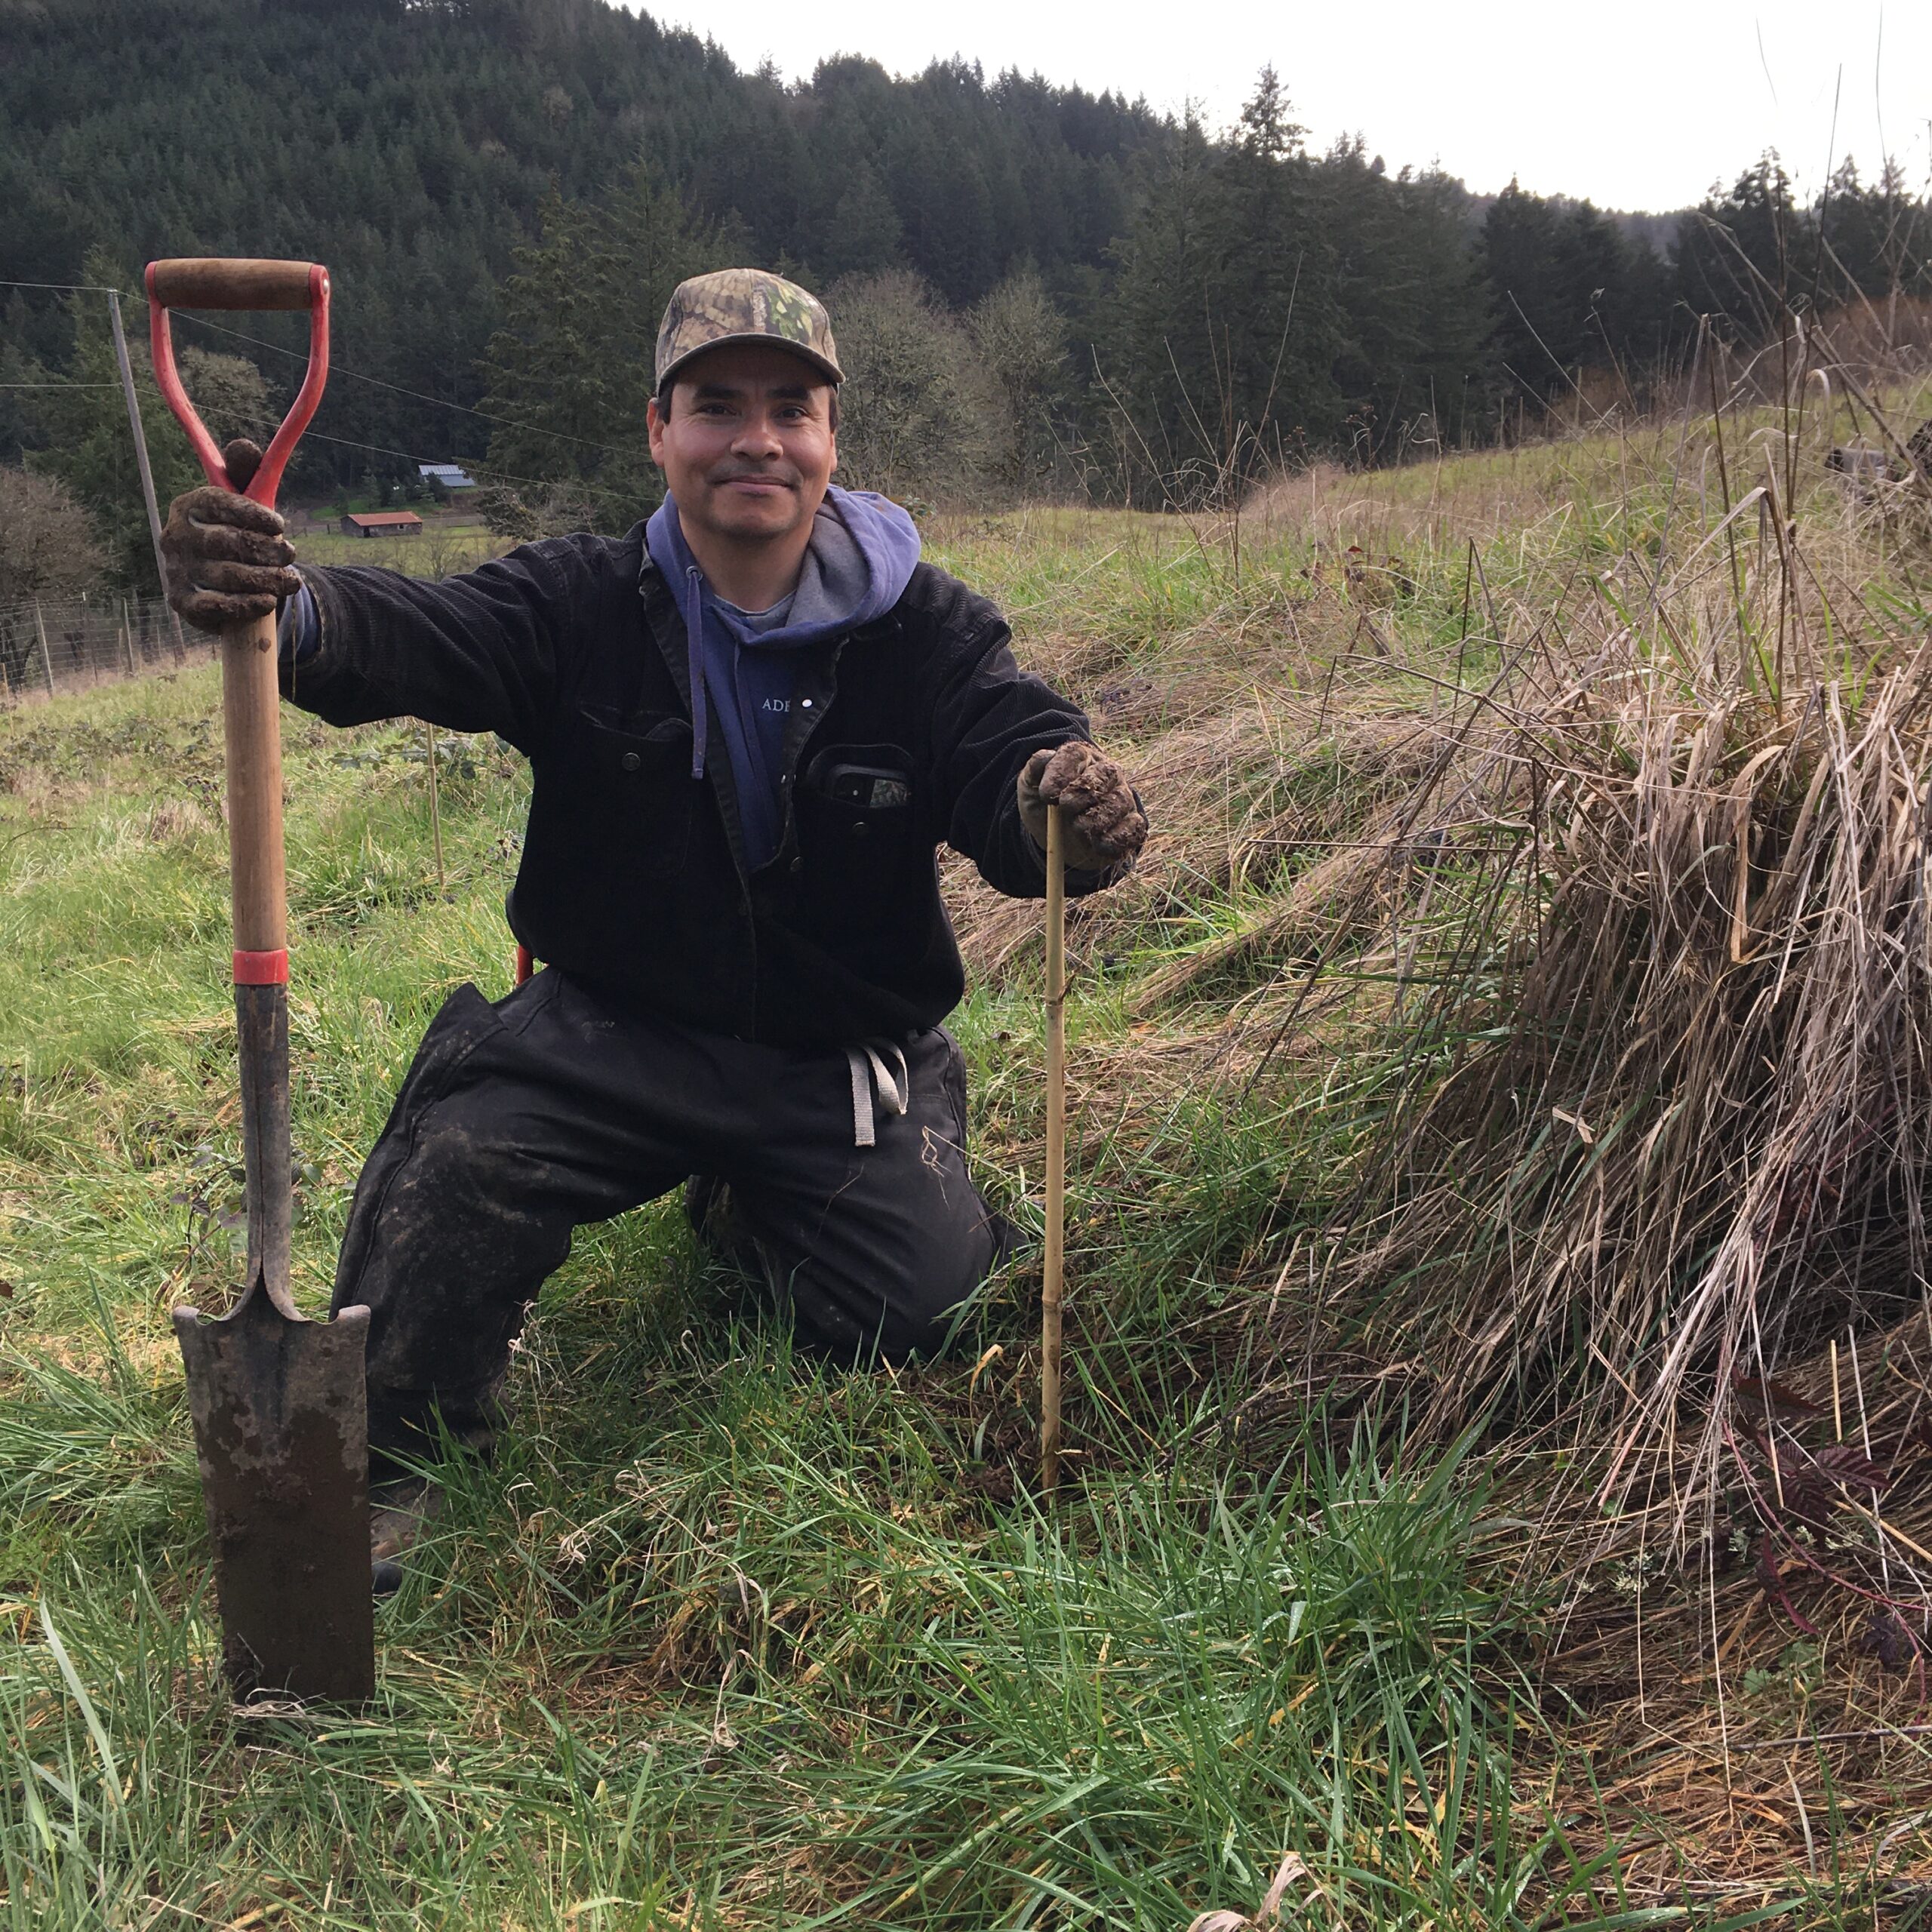 Fairsing celebrates 15years in Oregon's Willamette Valley by expanding sustainable practices which included planting 1,000 Oregon White Oak saplings